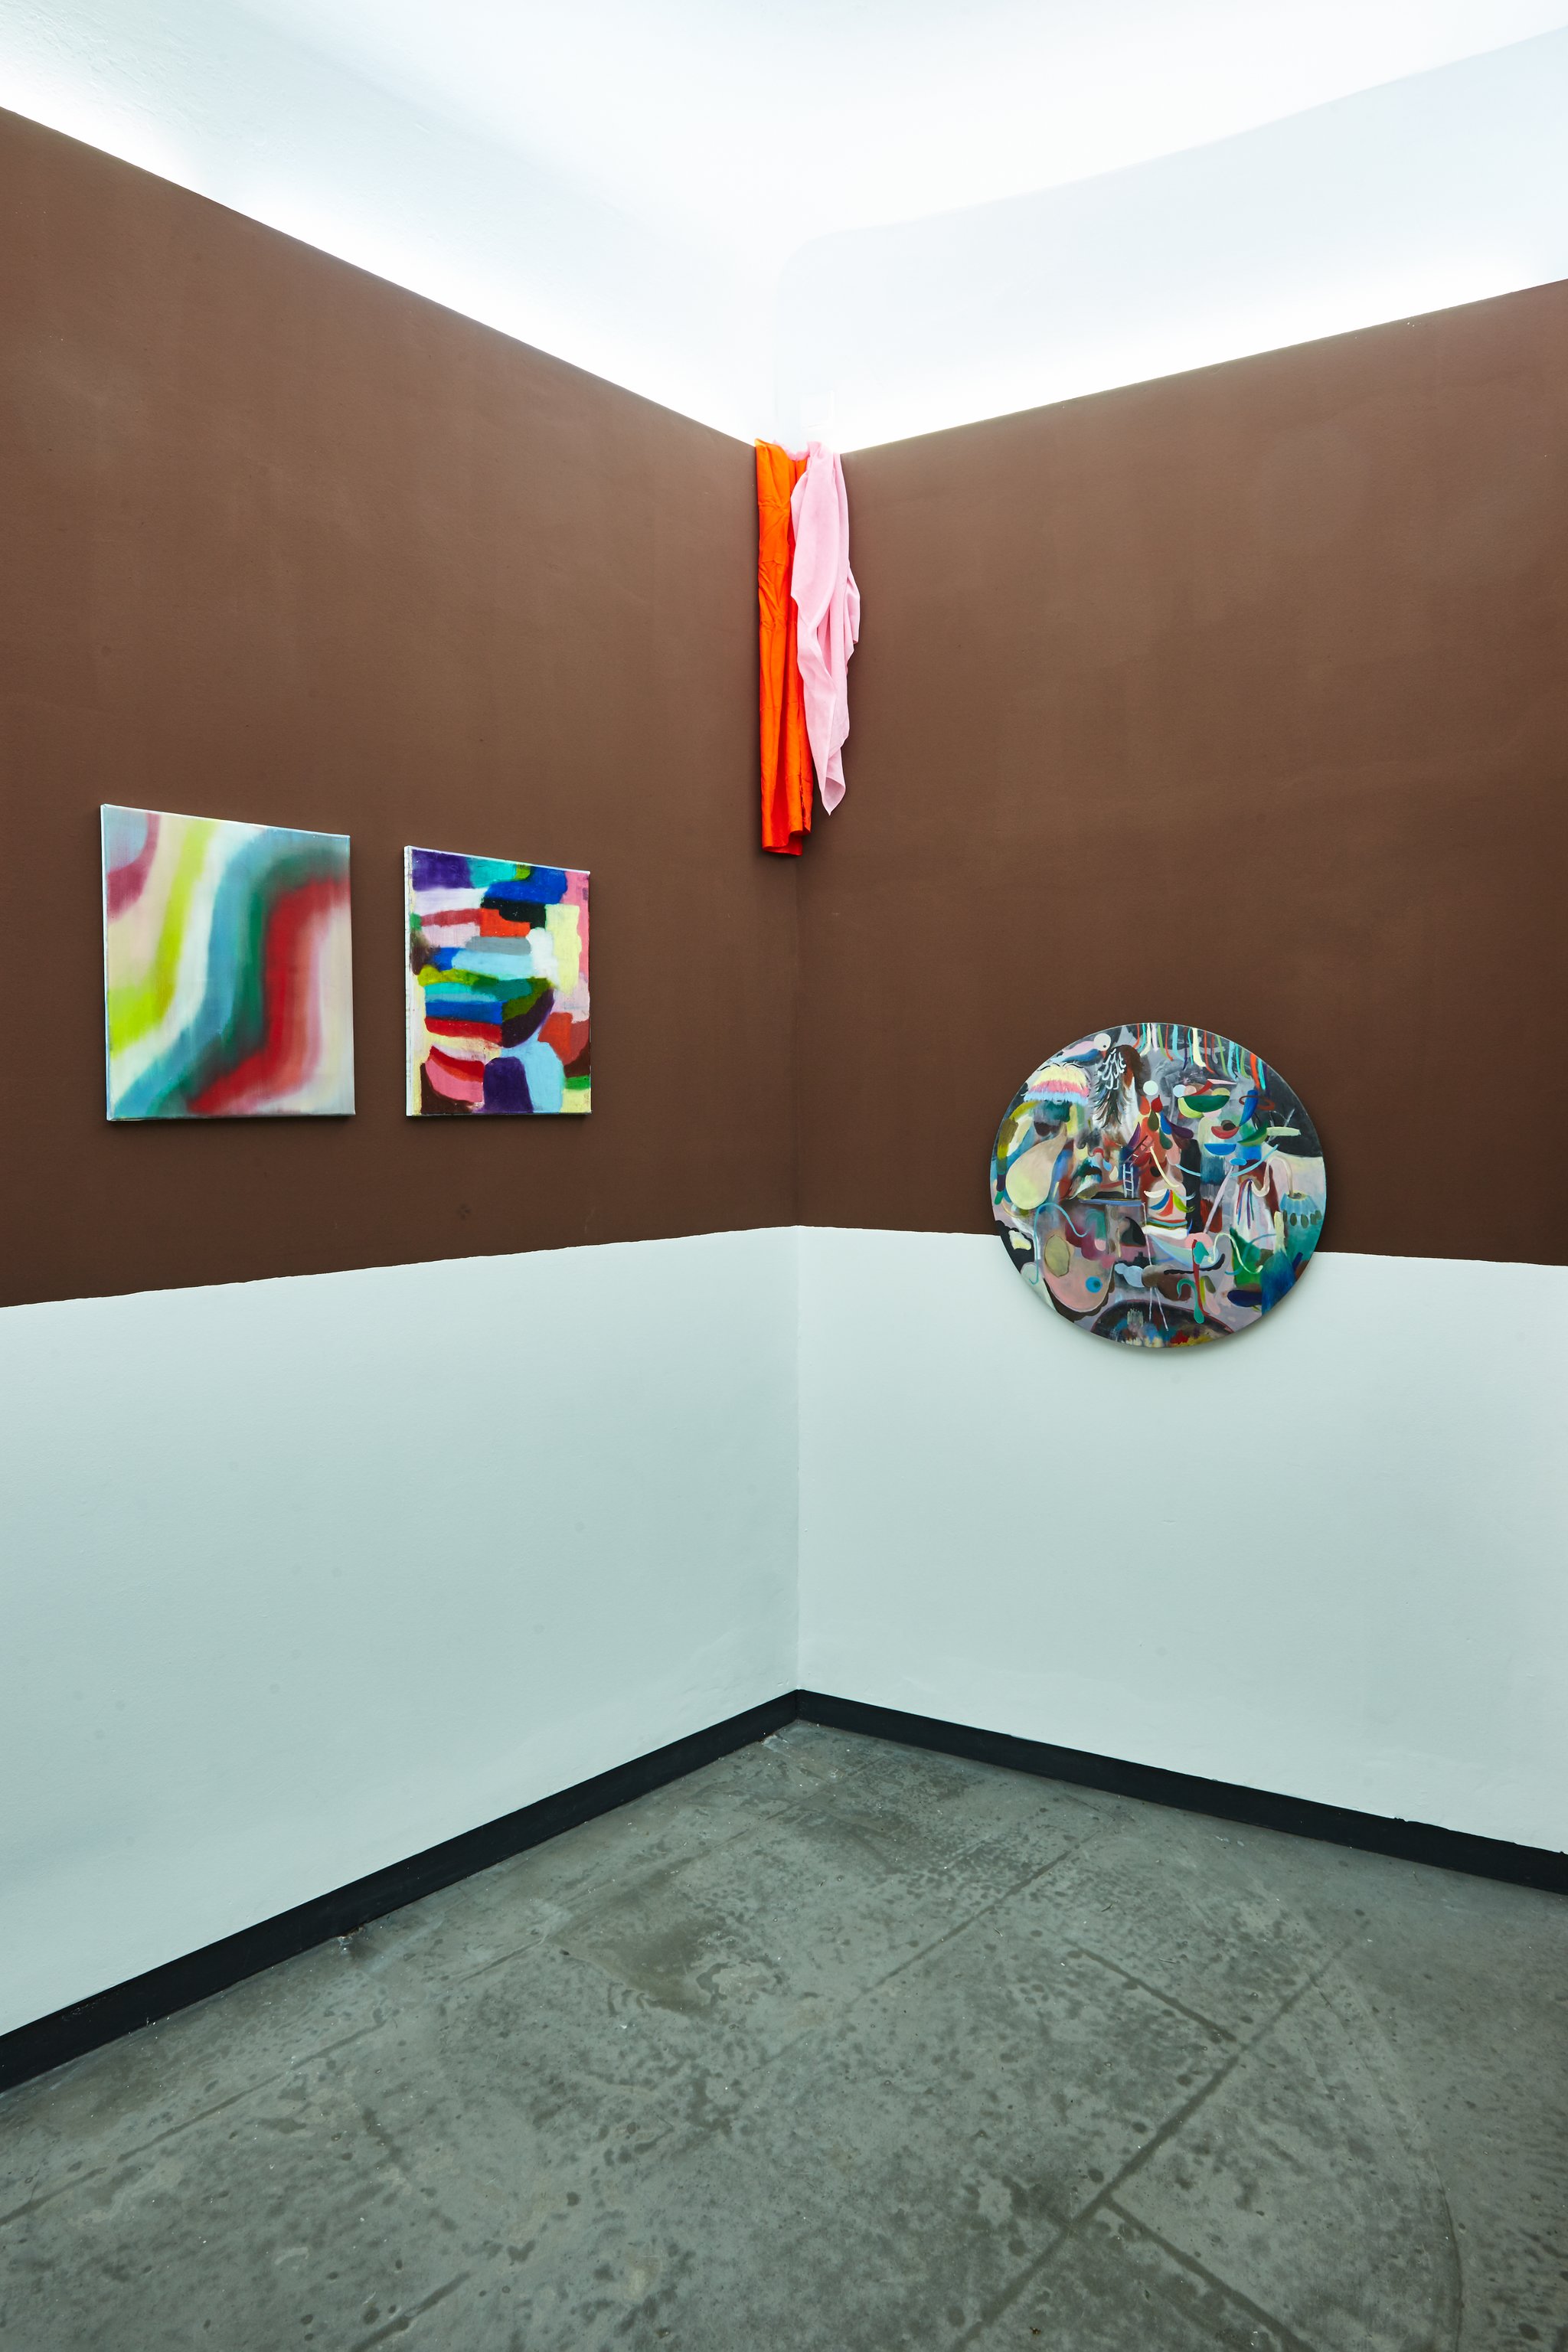 Installation view from "Here in the Real World"